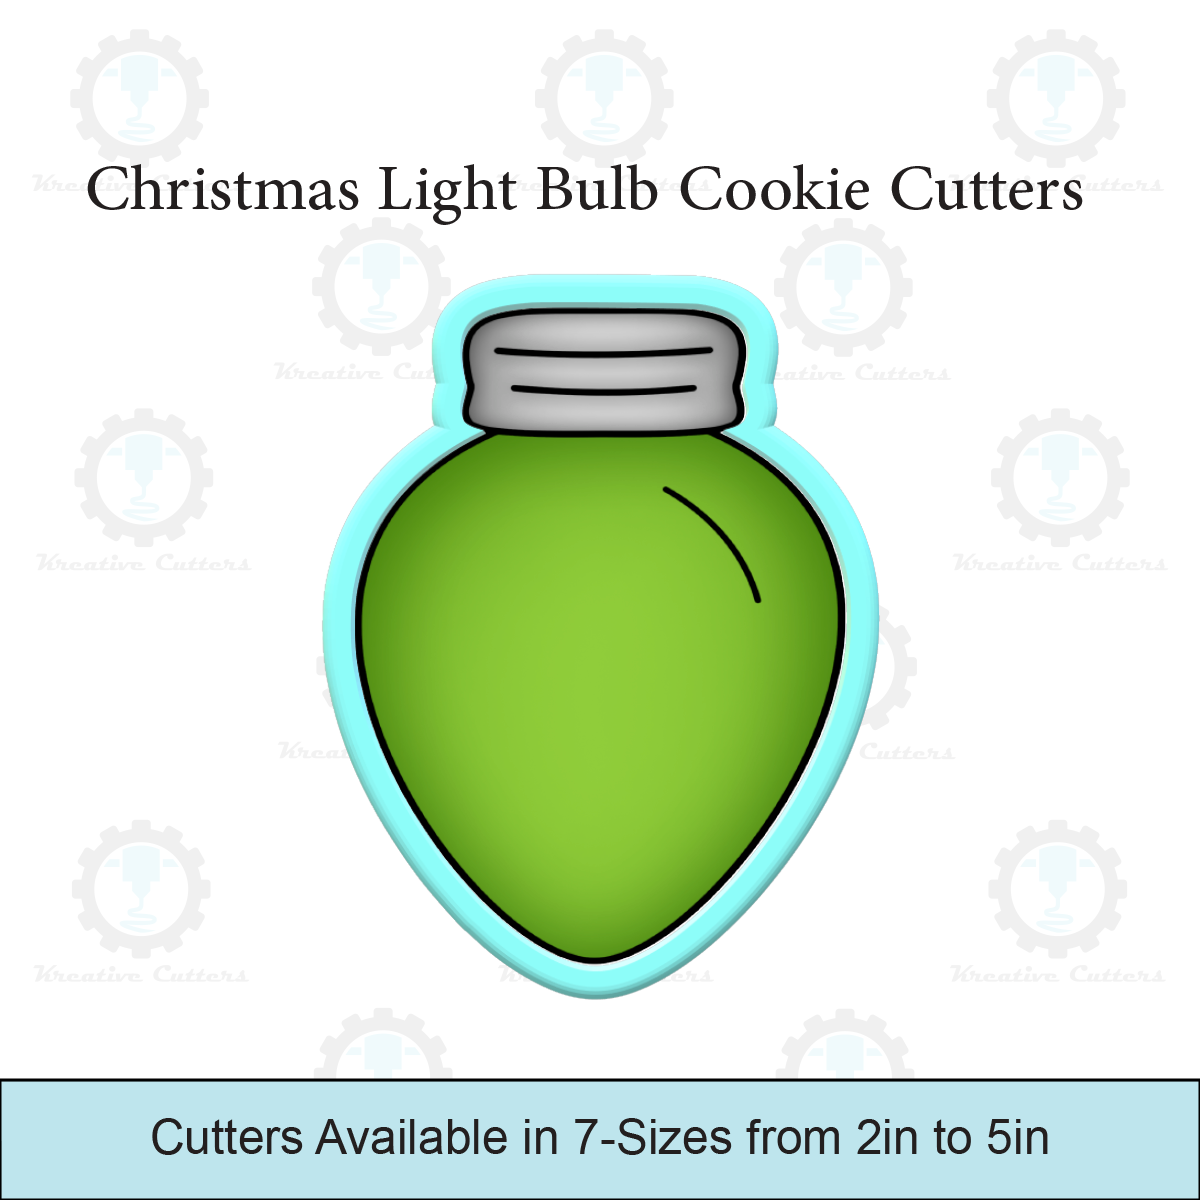 Christmas Light Bulb Cookie Cutters